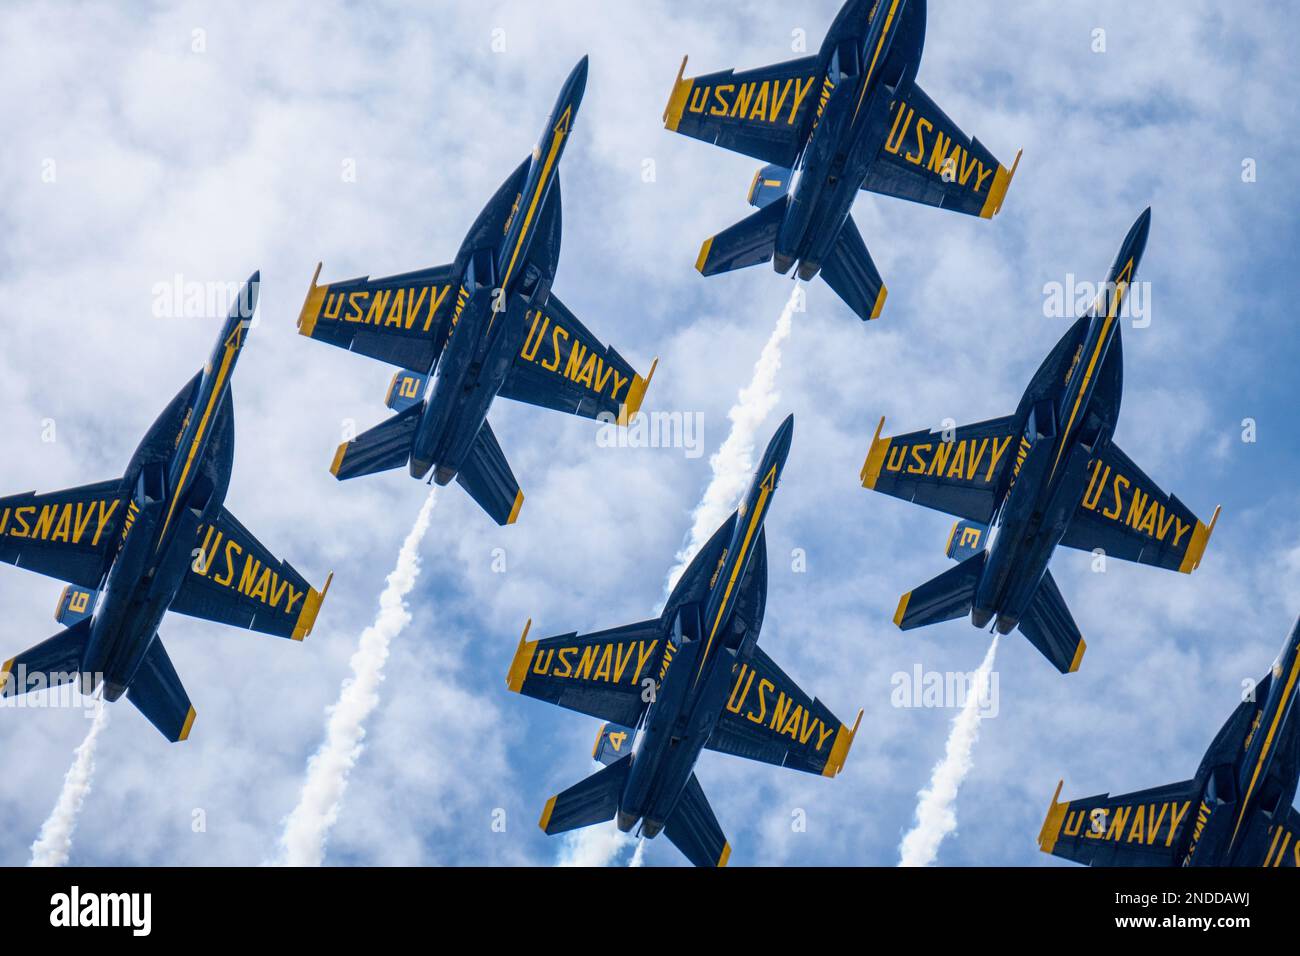 US Navy Blue Angels Demonstration team che si esibisce sul Golfo del Messico. Foto Stock